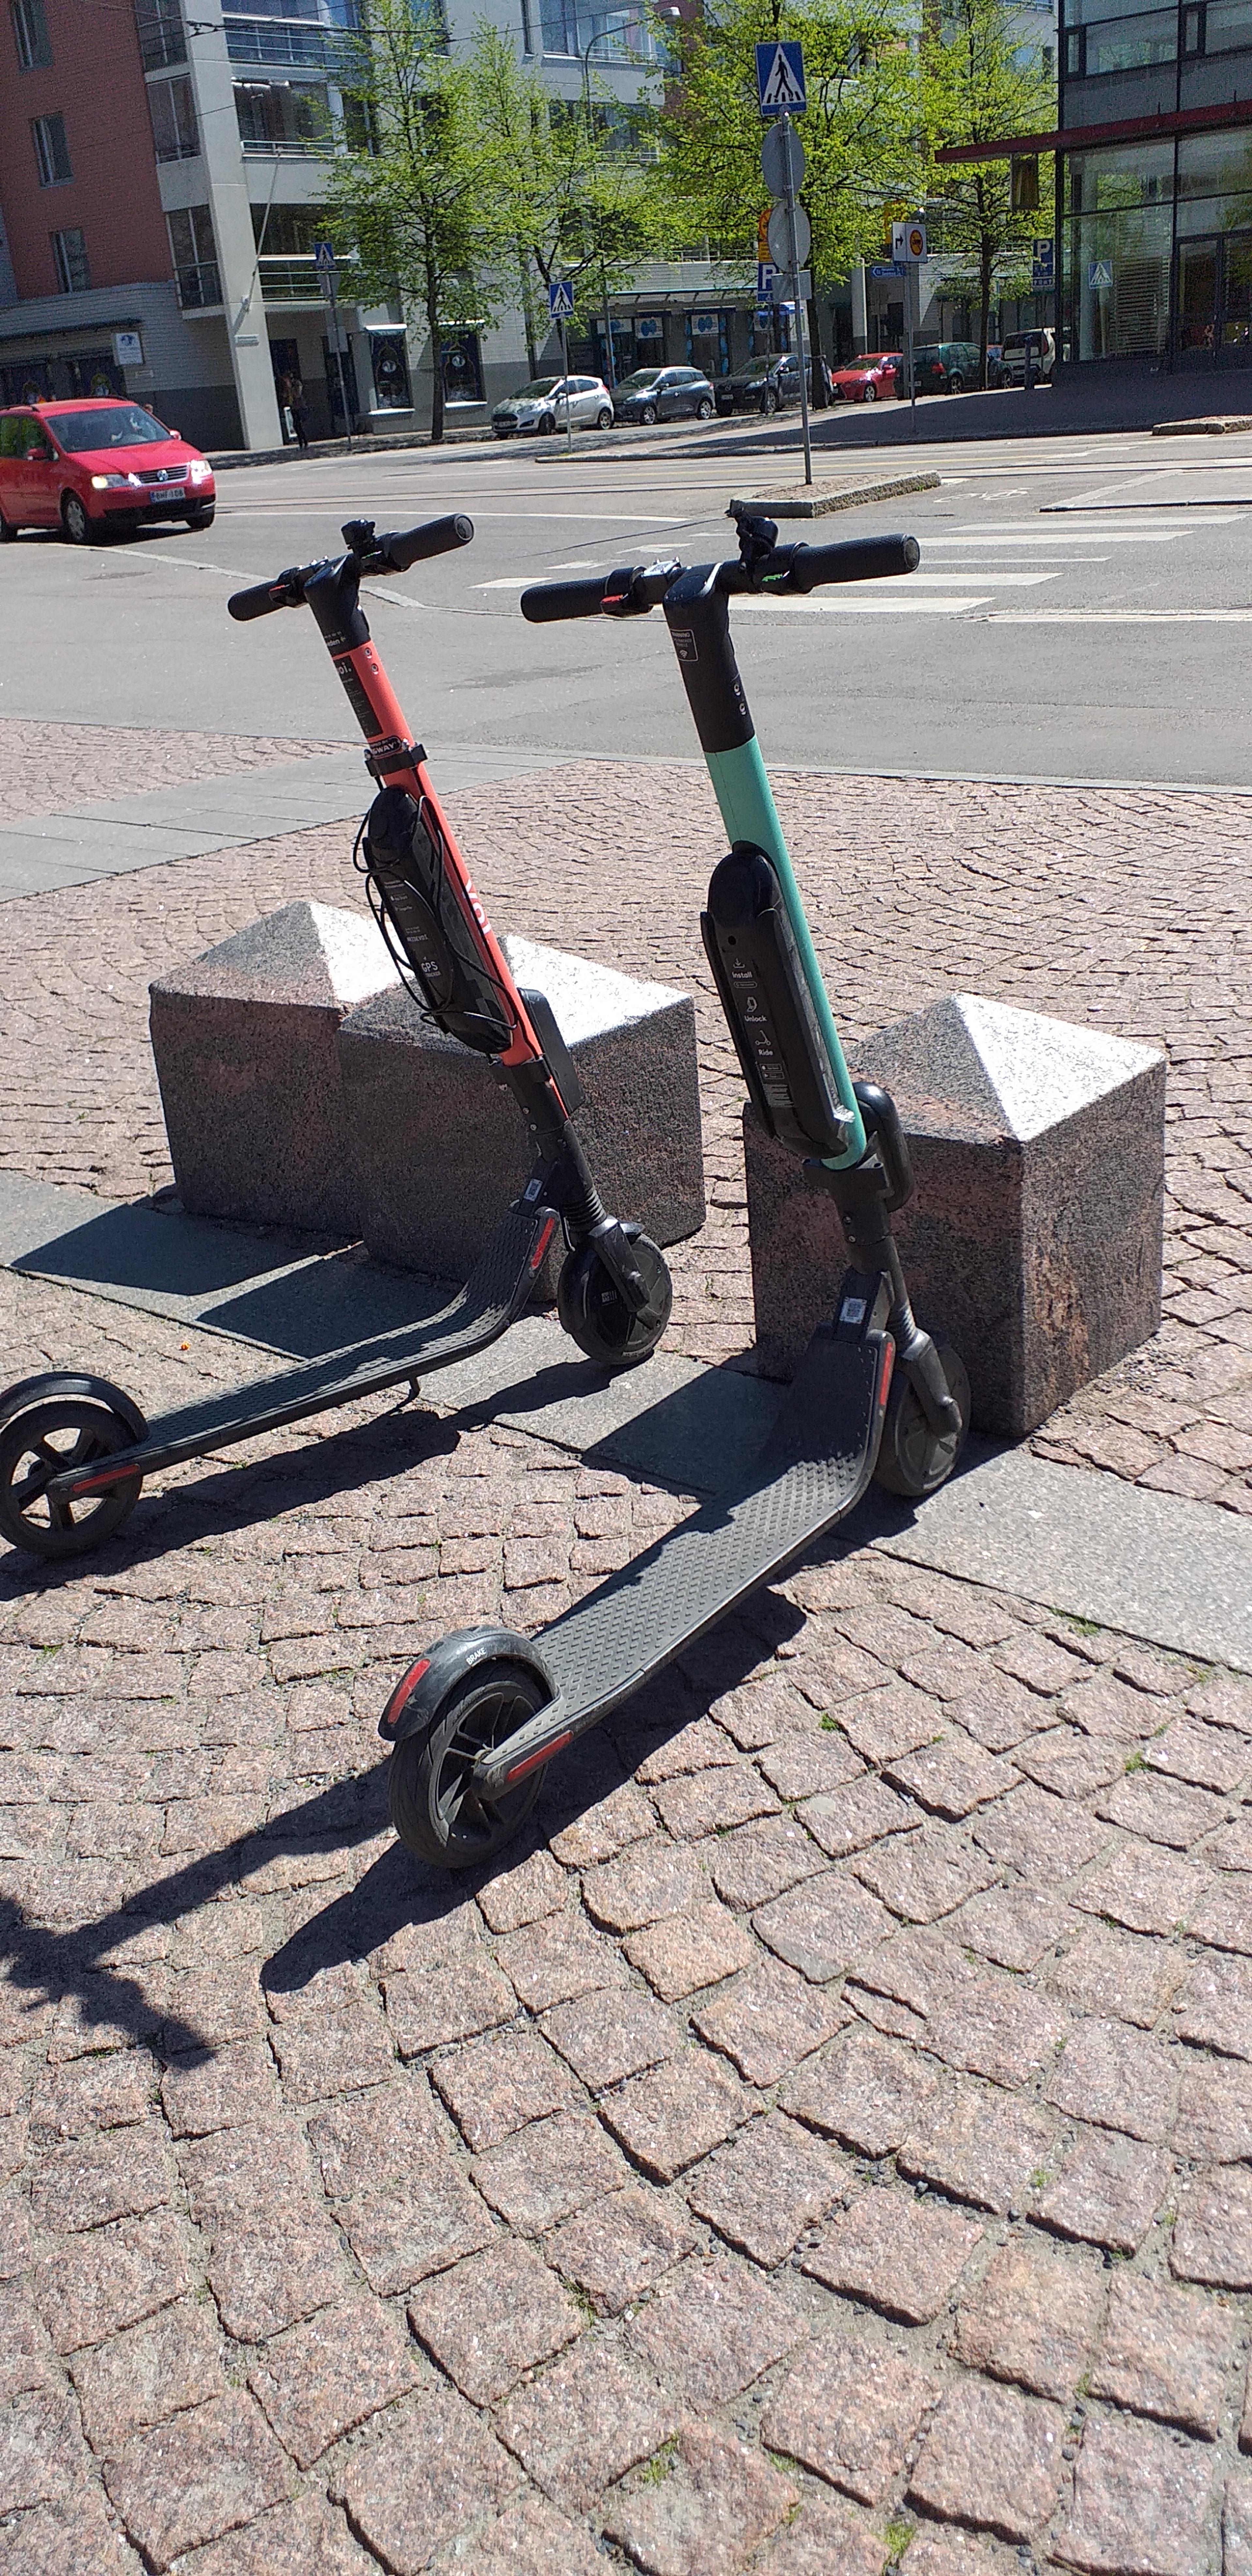 Cover image of this place E-scooters